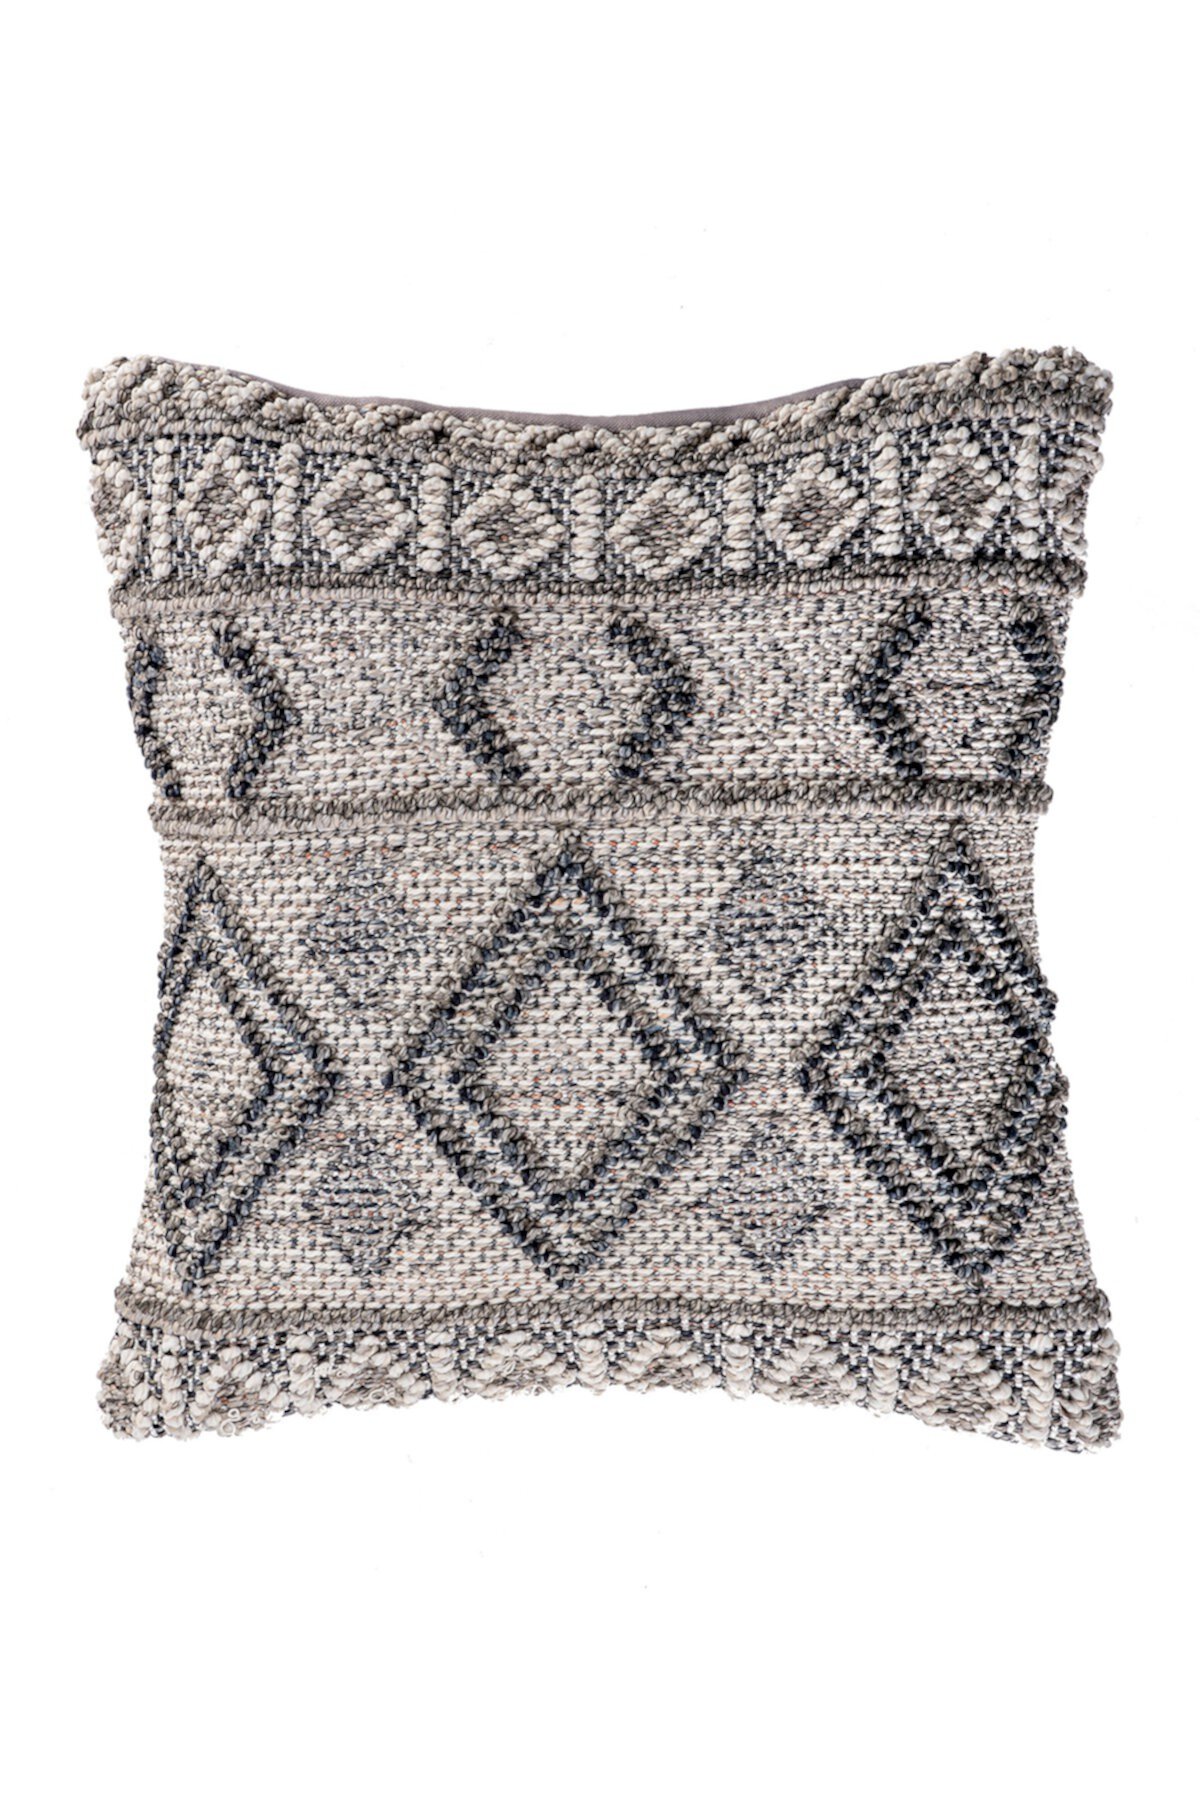 Maia Textured Moroccan Throw Pillow Cover NuLOOM